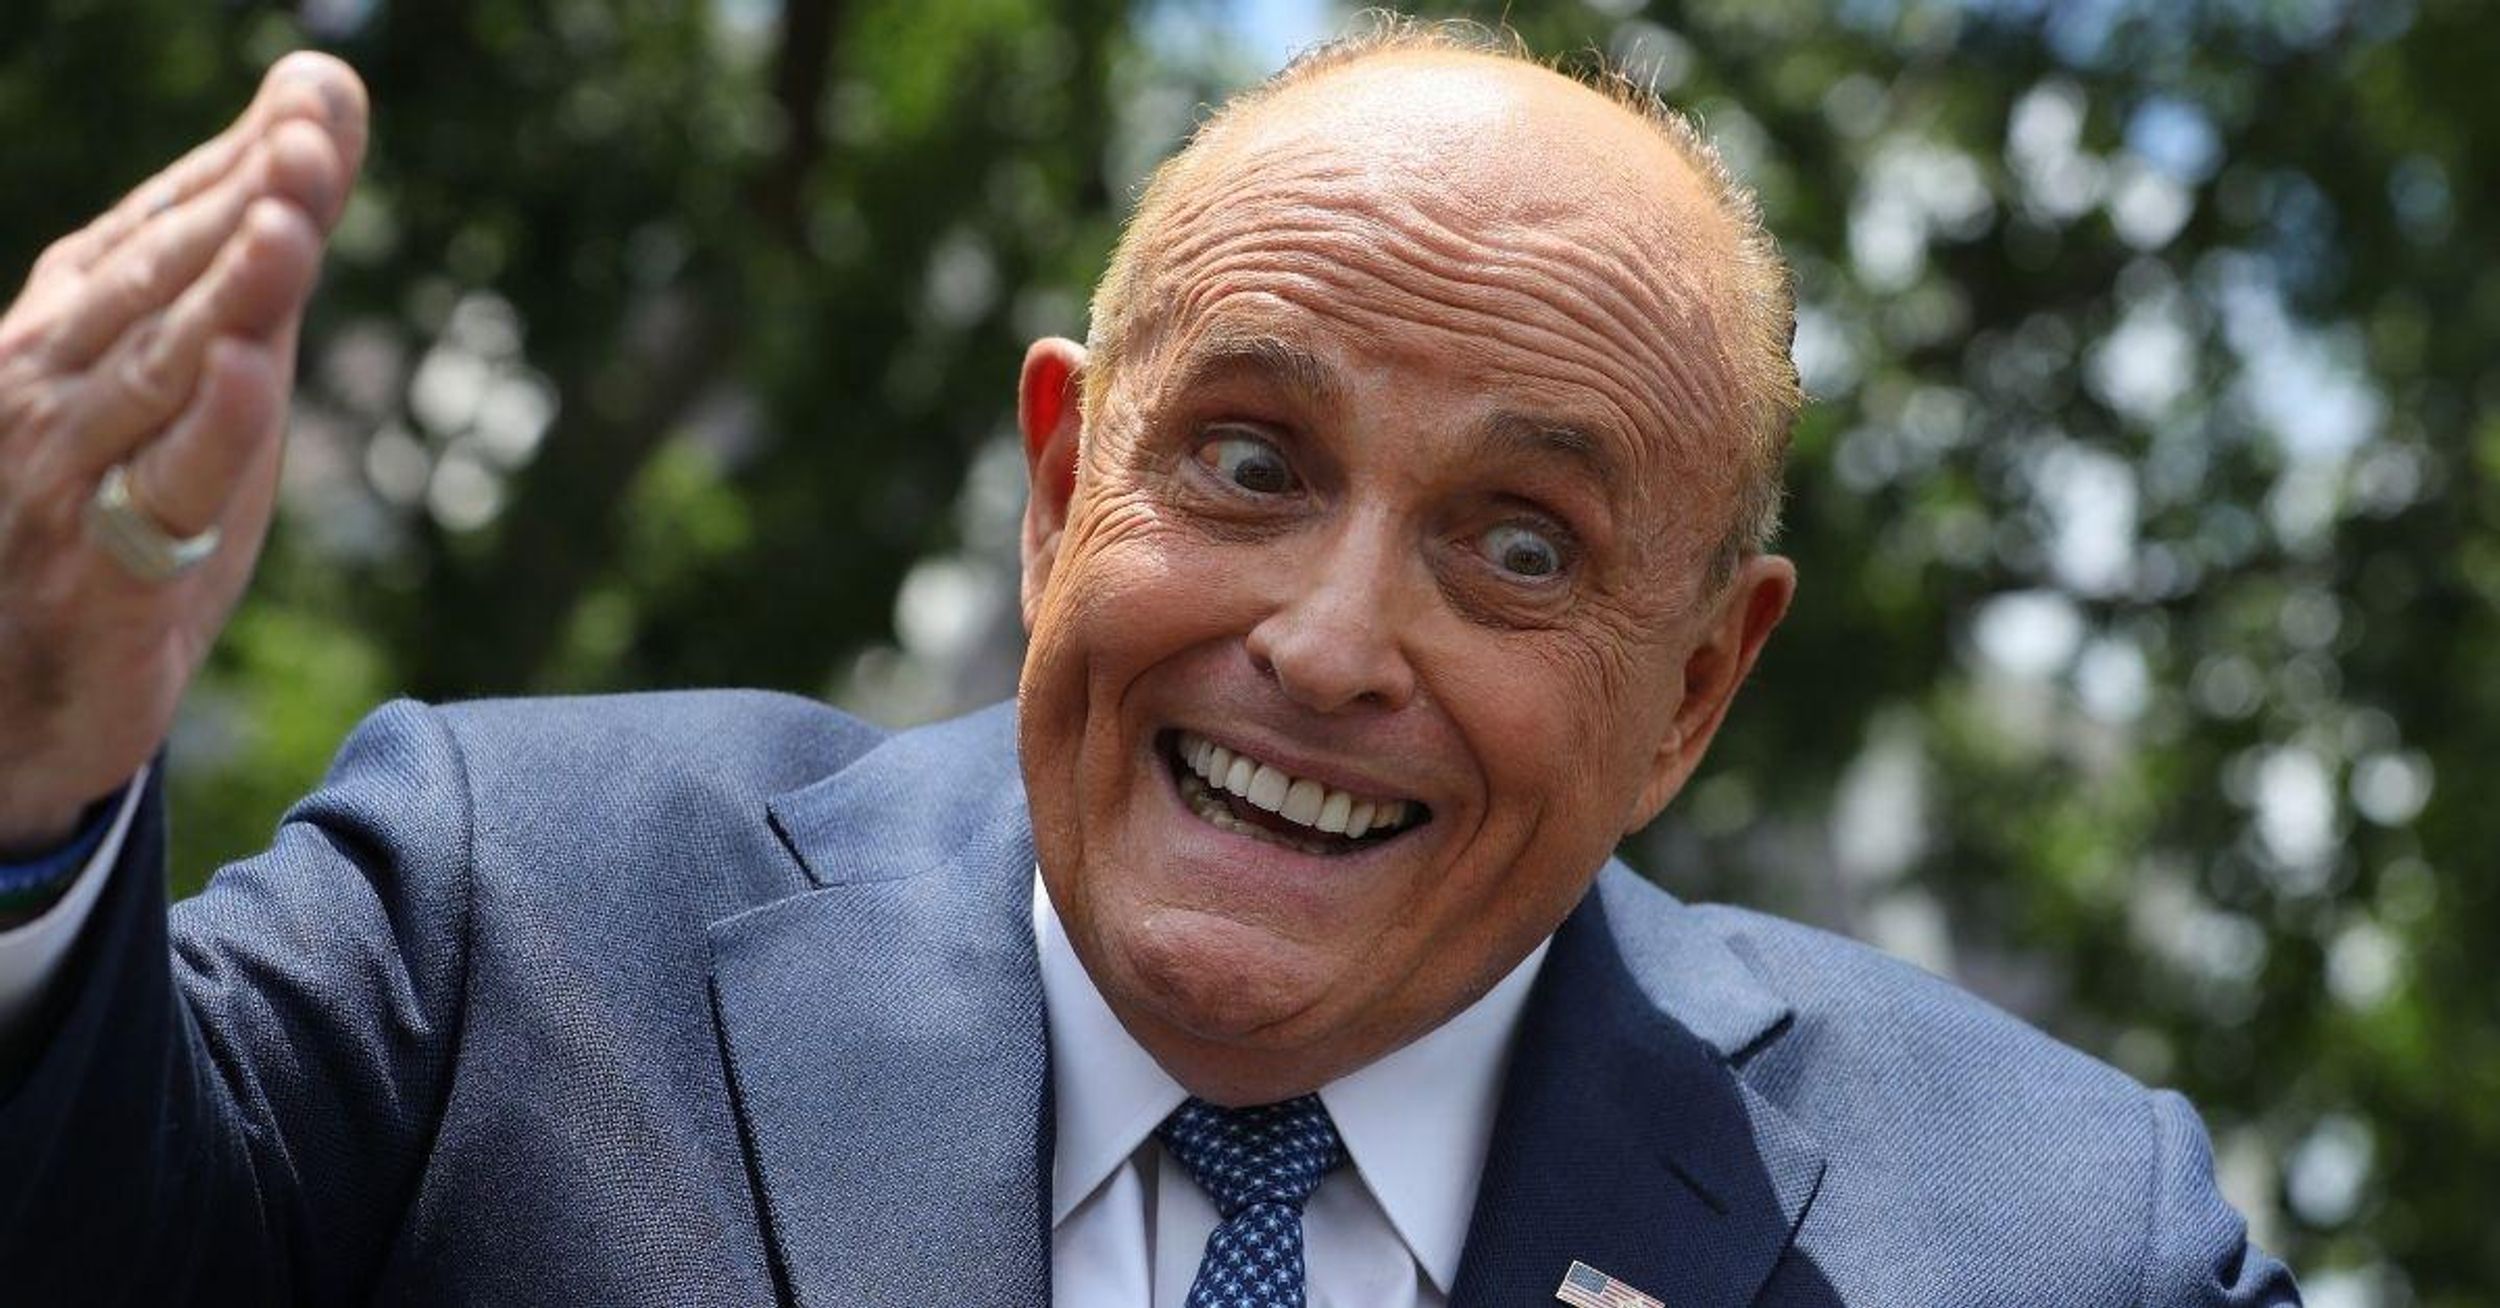 Giuliani Dragged After Butchering The Spelling Of Candidate's Name In Bonkers Endorsement Tweet